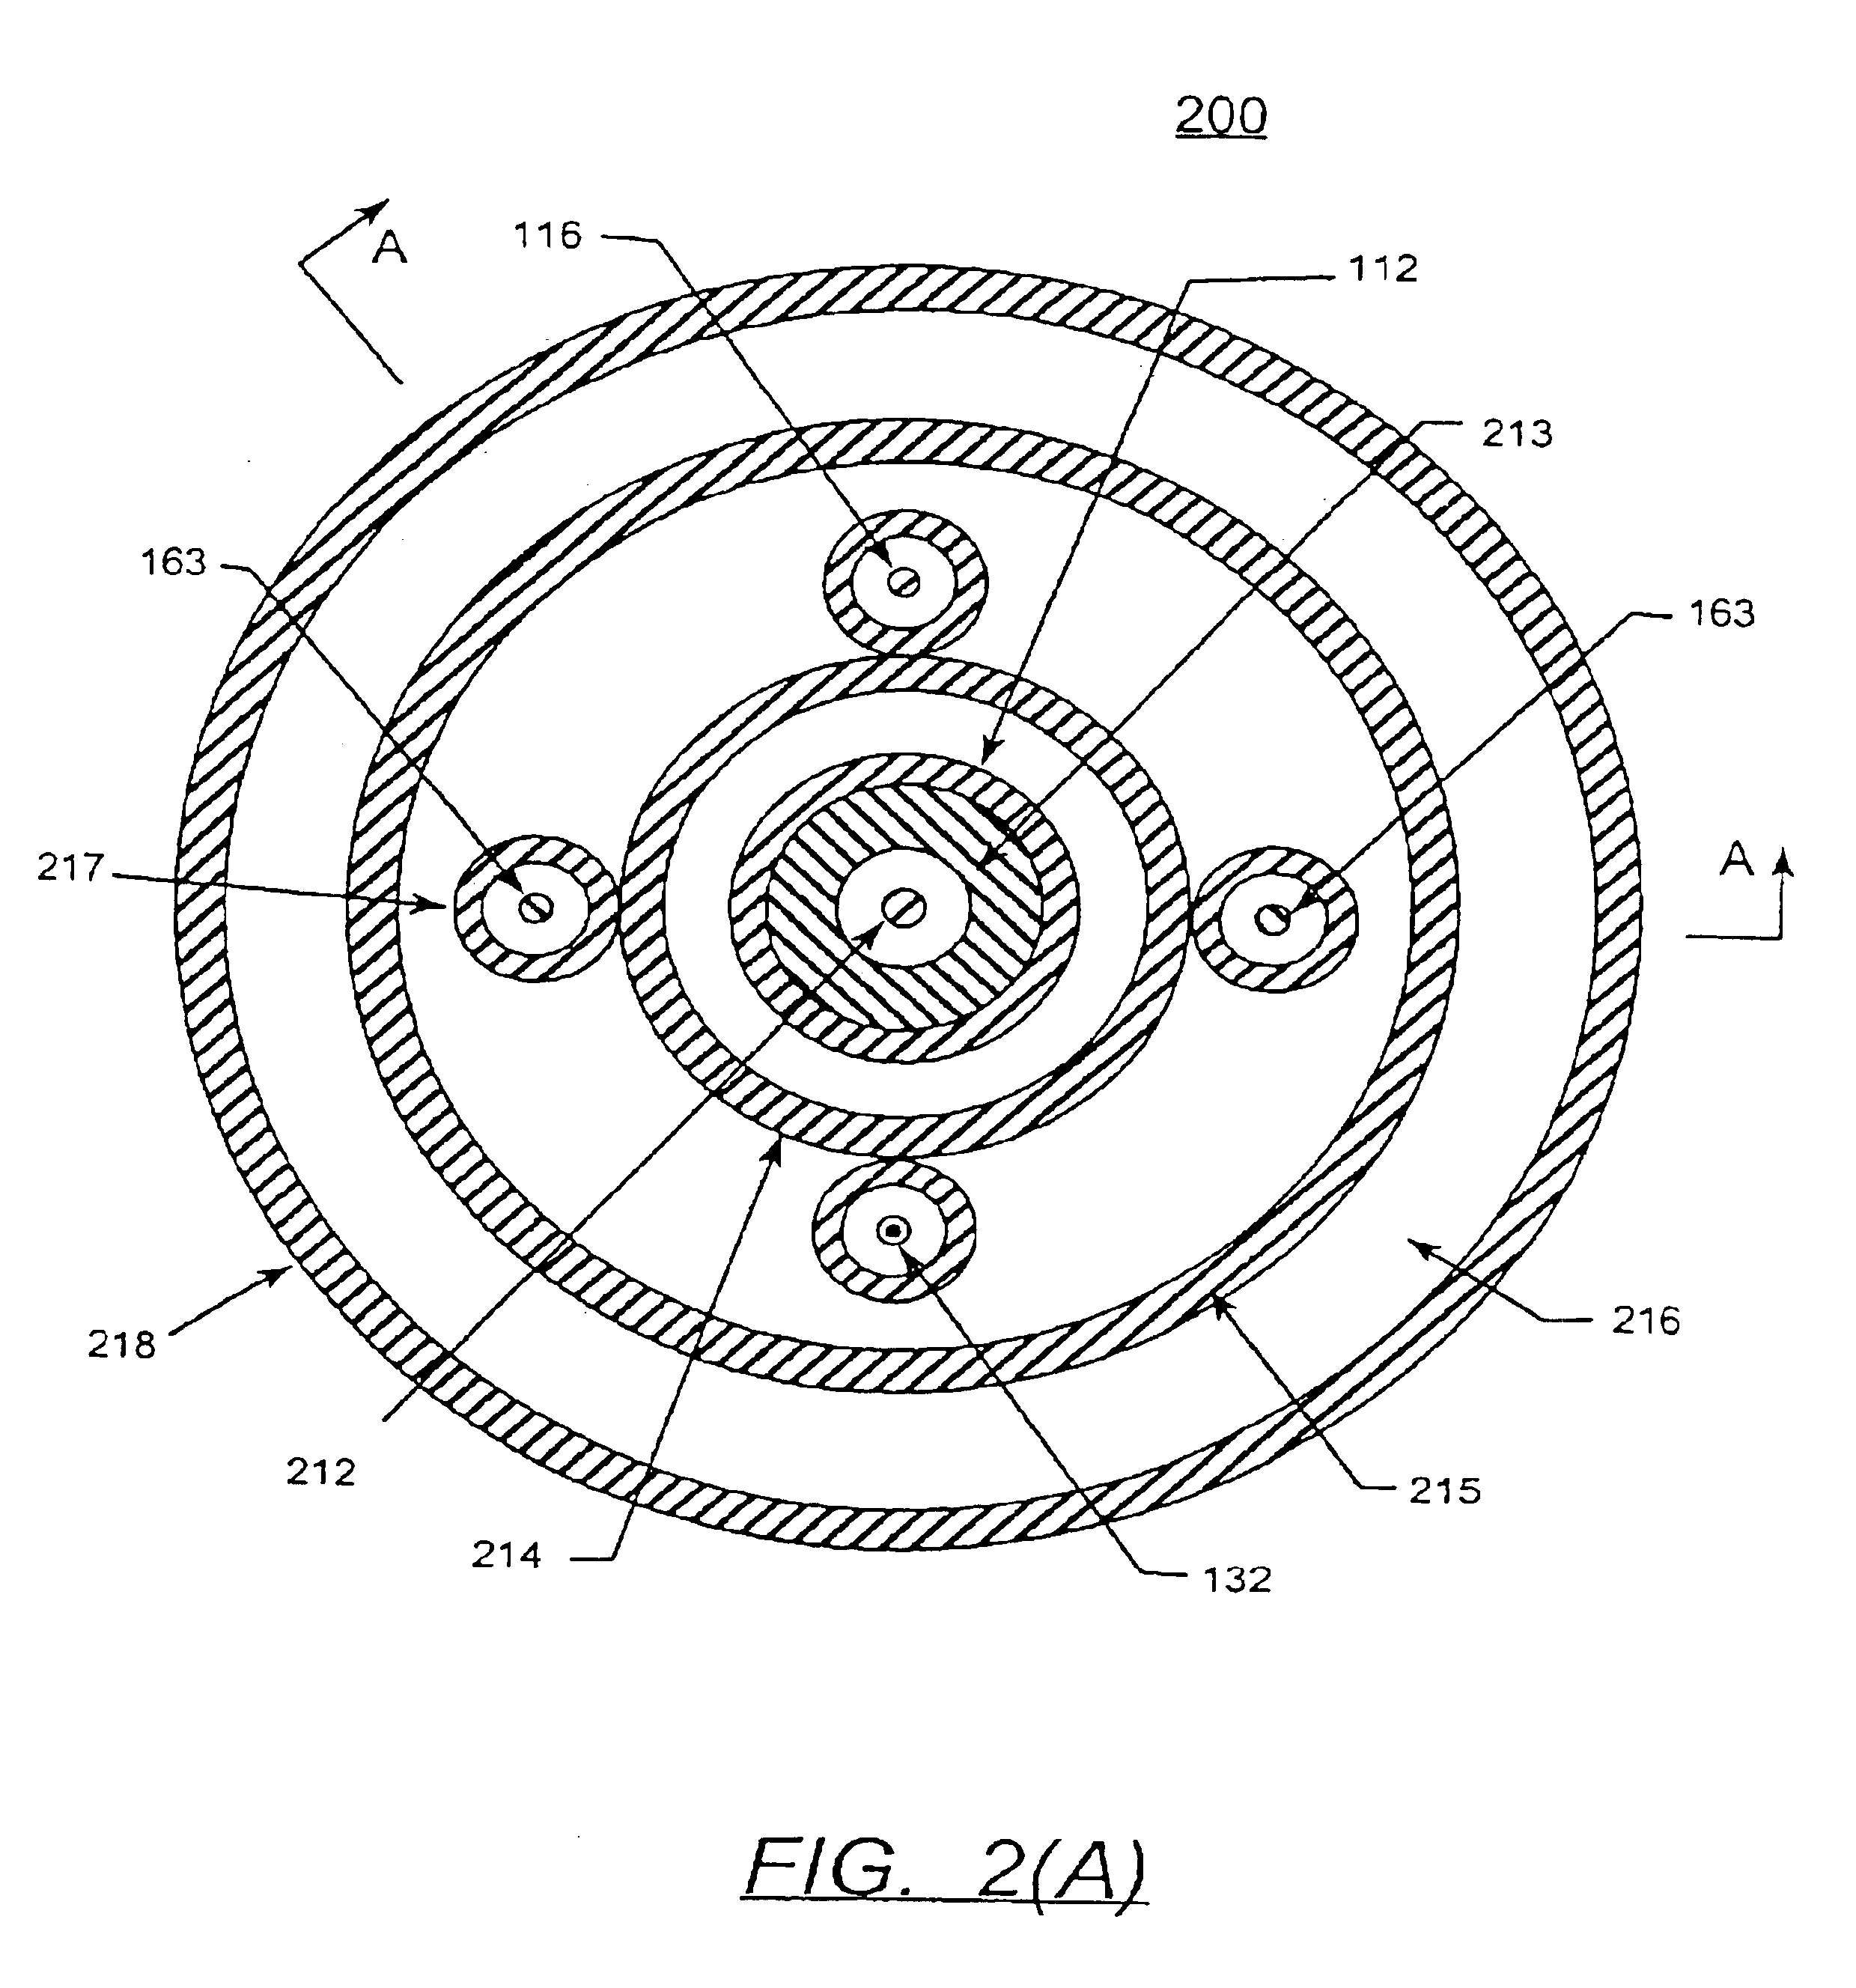 Apparatus for the enhancement of water quality in a subterranean pressurized water distribution system